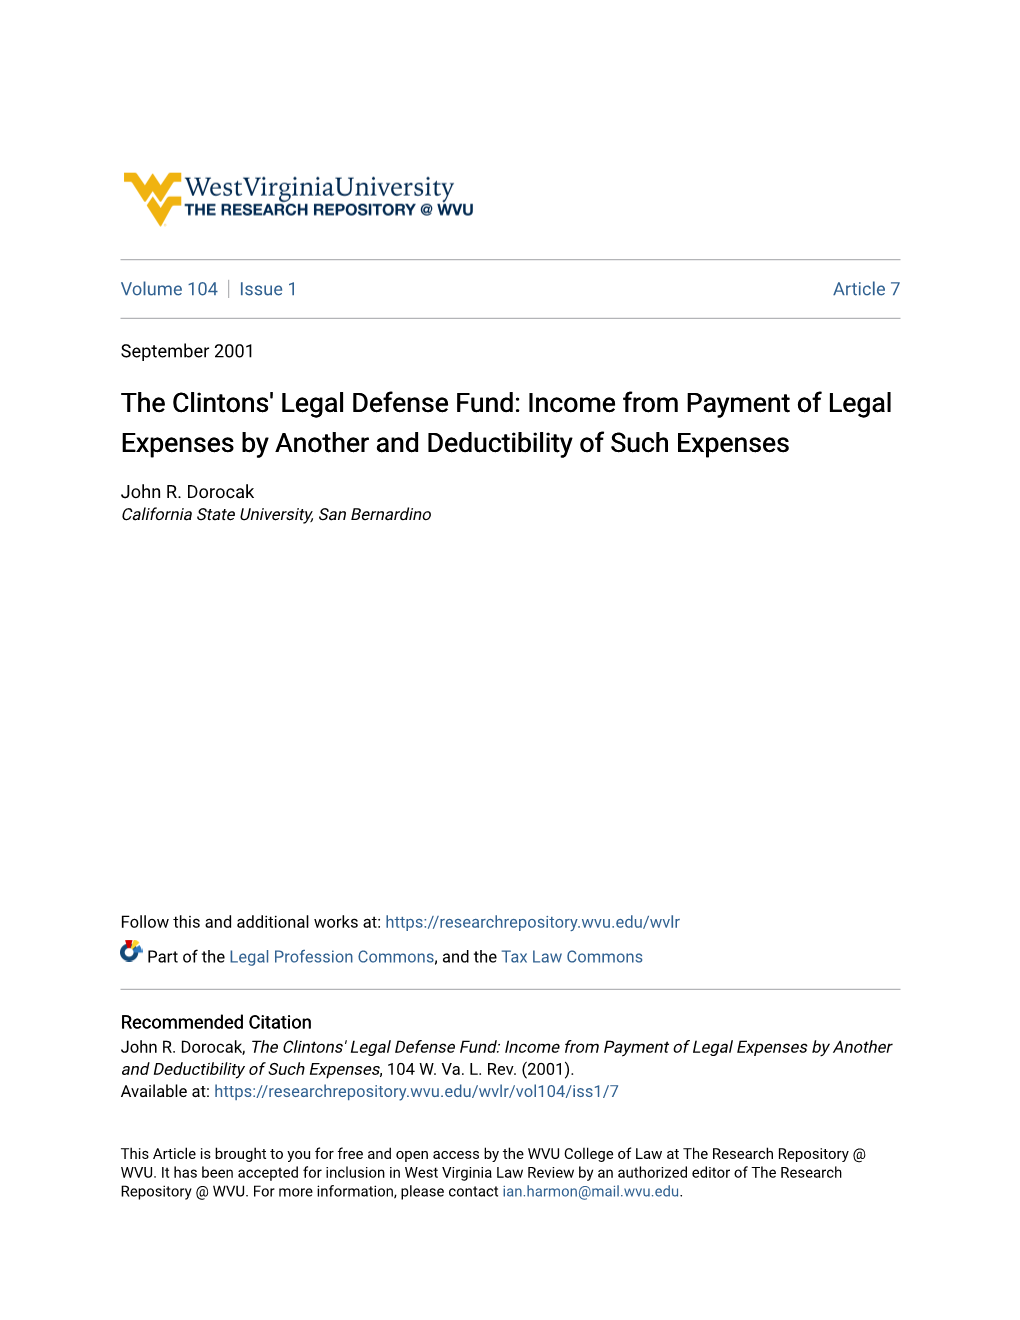 The Clintons' Legal Defense Fund: Income from Payment of Legal Expenses by Another and Deductibility of Such Expenses